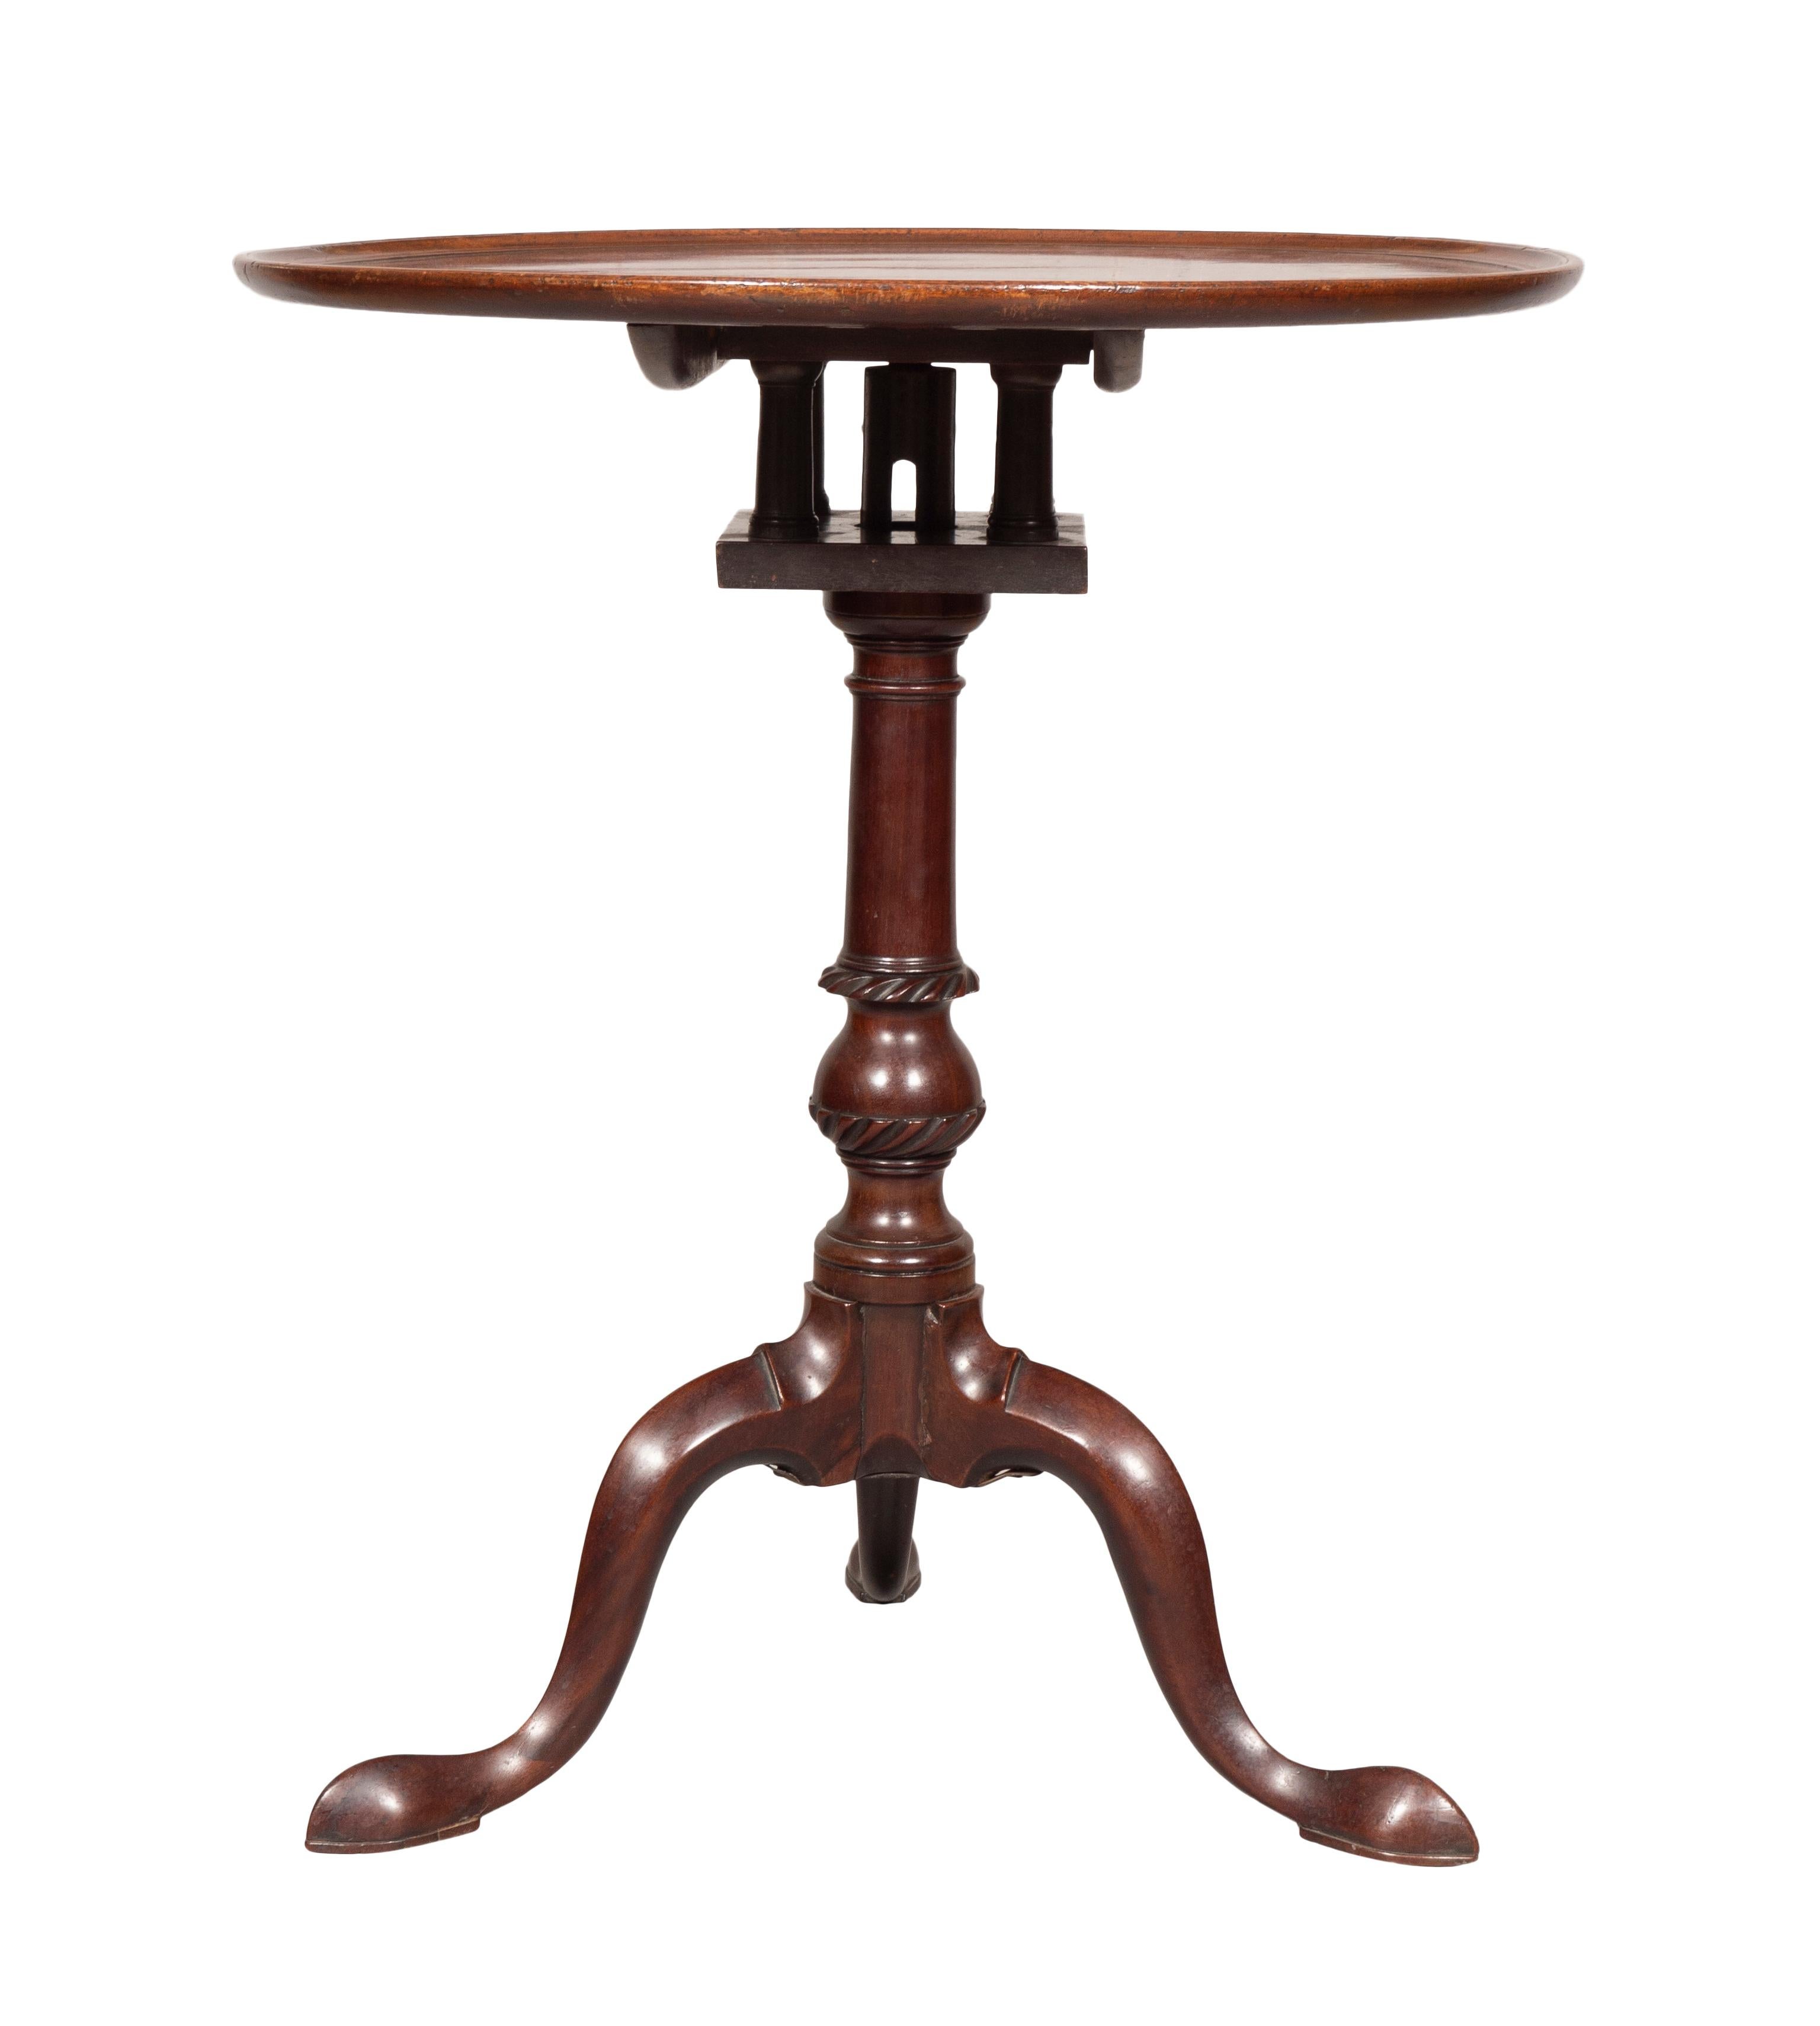 Circular dished top with hinged bird cage and carved and turned support joining three cabriole legs ending on pad feet.